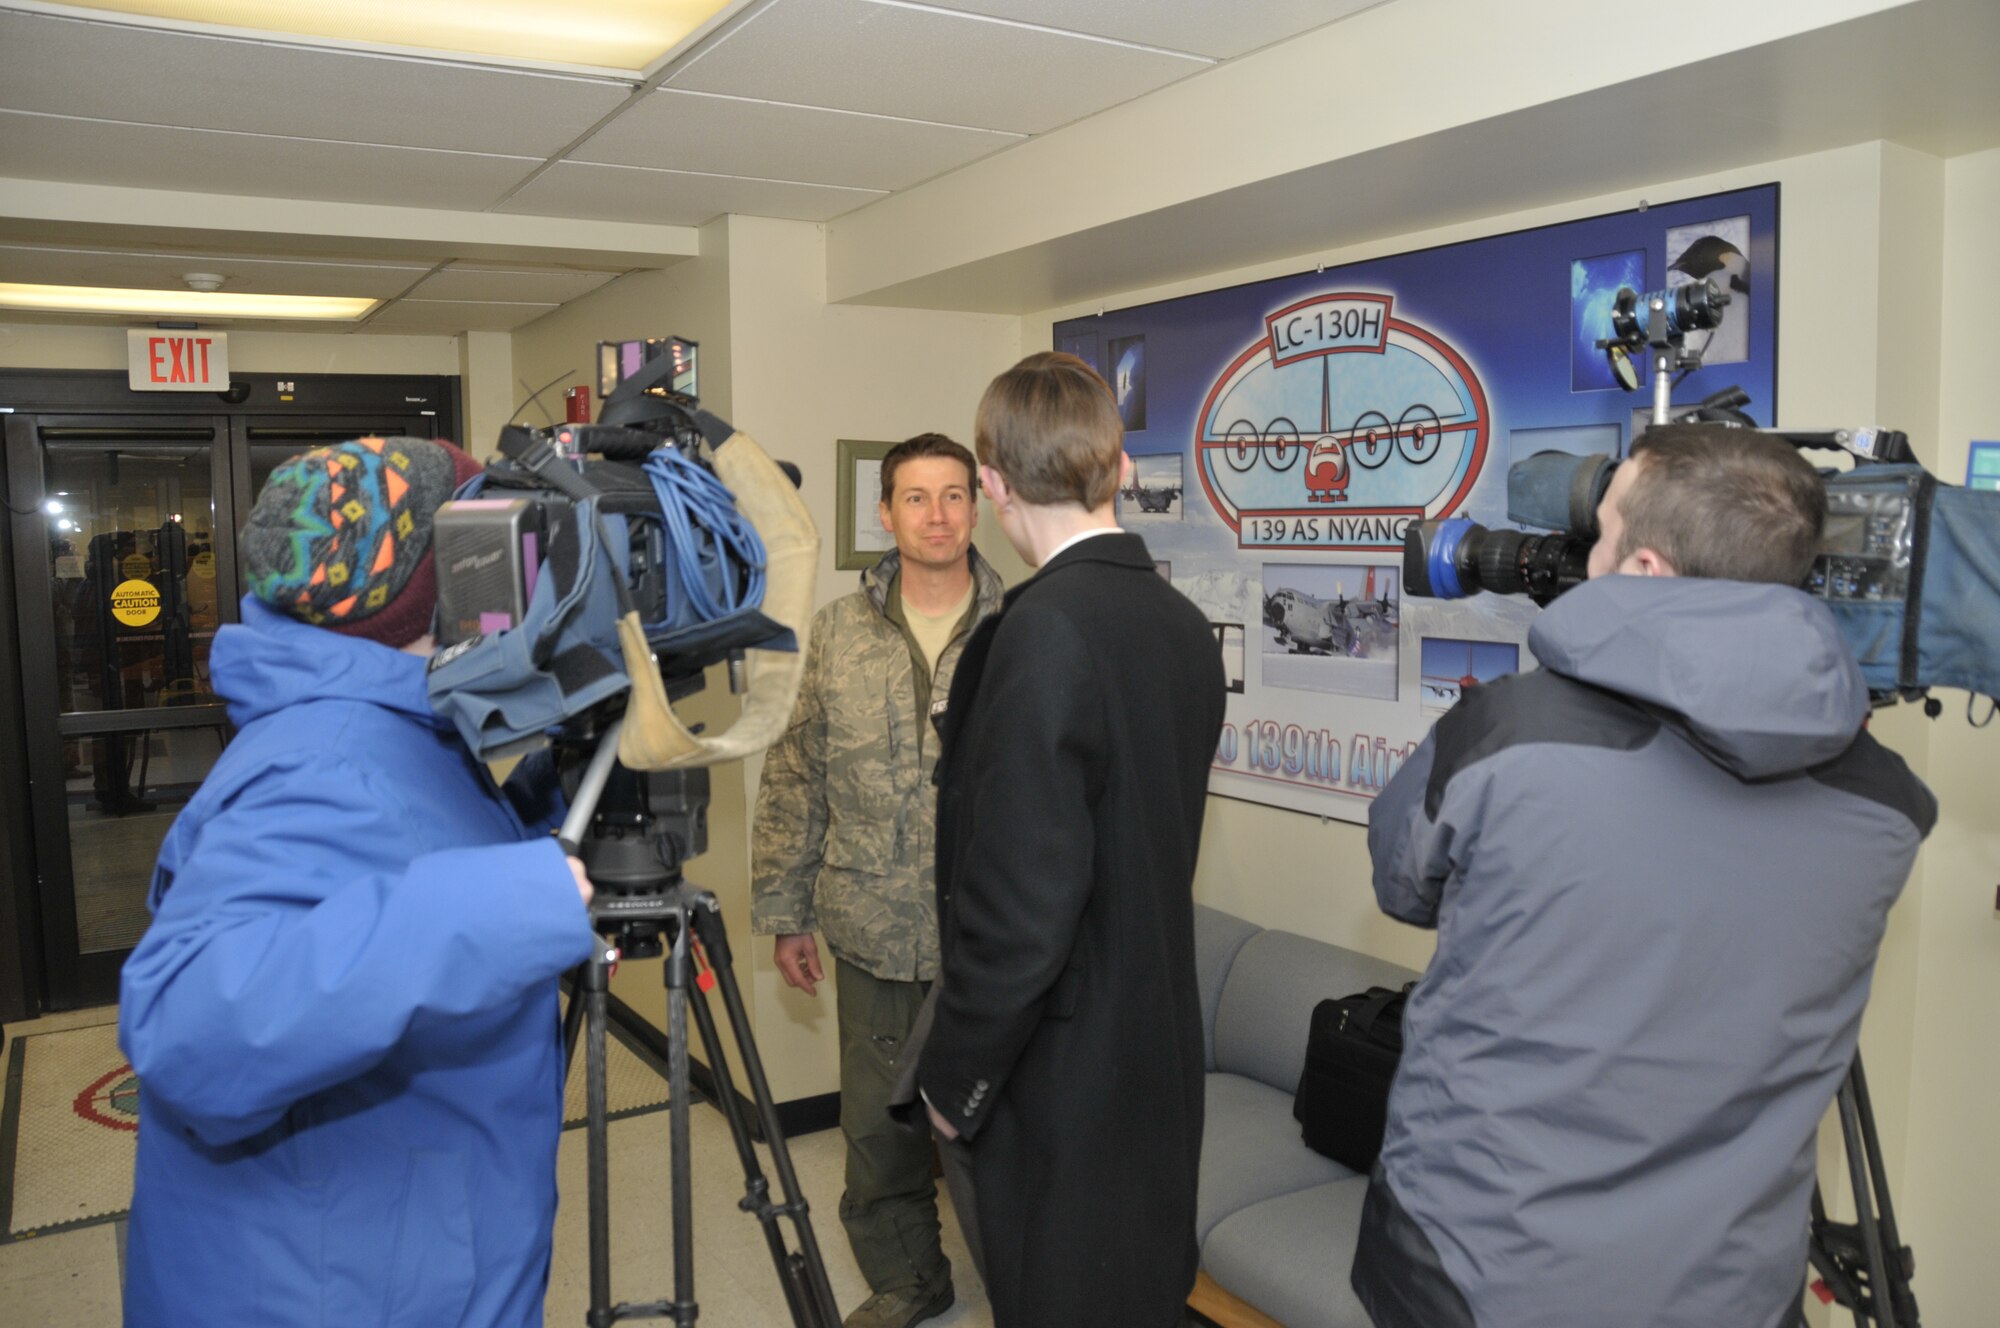 Maj Joshua Hicks, a pilot with the 109th Airlift Wing, New York Air National Guard, is interviewed by local media after flying an LC-130 aircraft from Antarctica back to New York.  The wing has just completed its 24th year supporting National Science Foundation operations throughout the continent of Antarctica.  (U.S. Air Force photo by MSgt. Willie Gizara/Released)